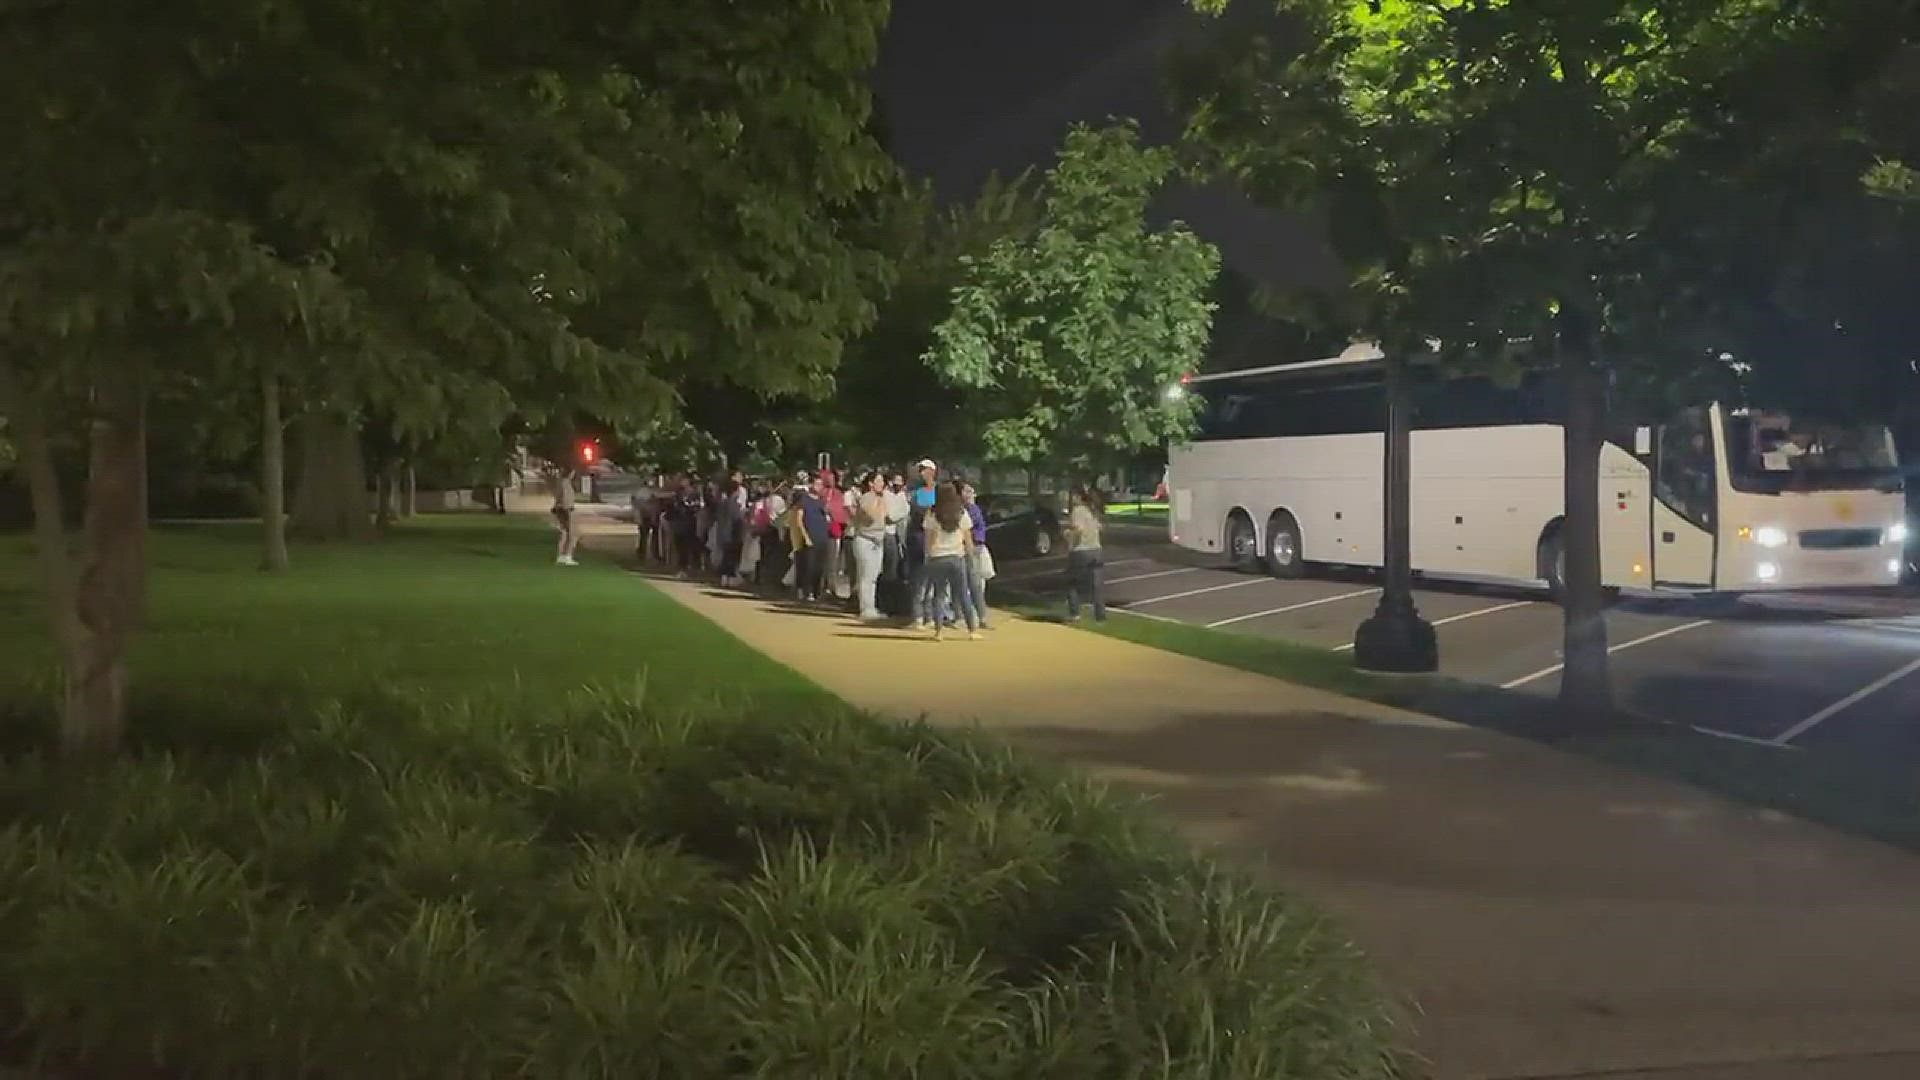 A bus said to be carrying migrants from Texas arrived at Union Station early Thursday morning.